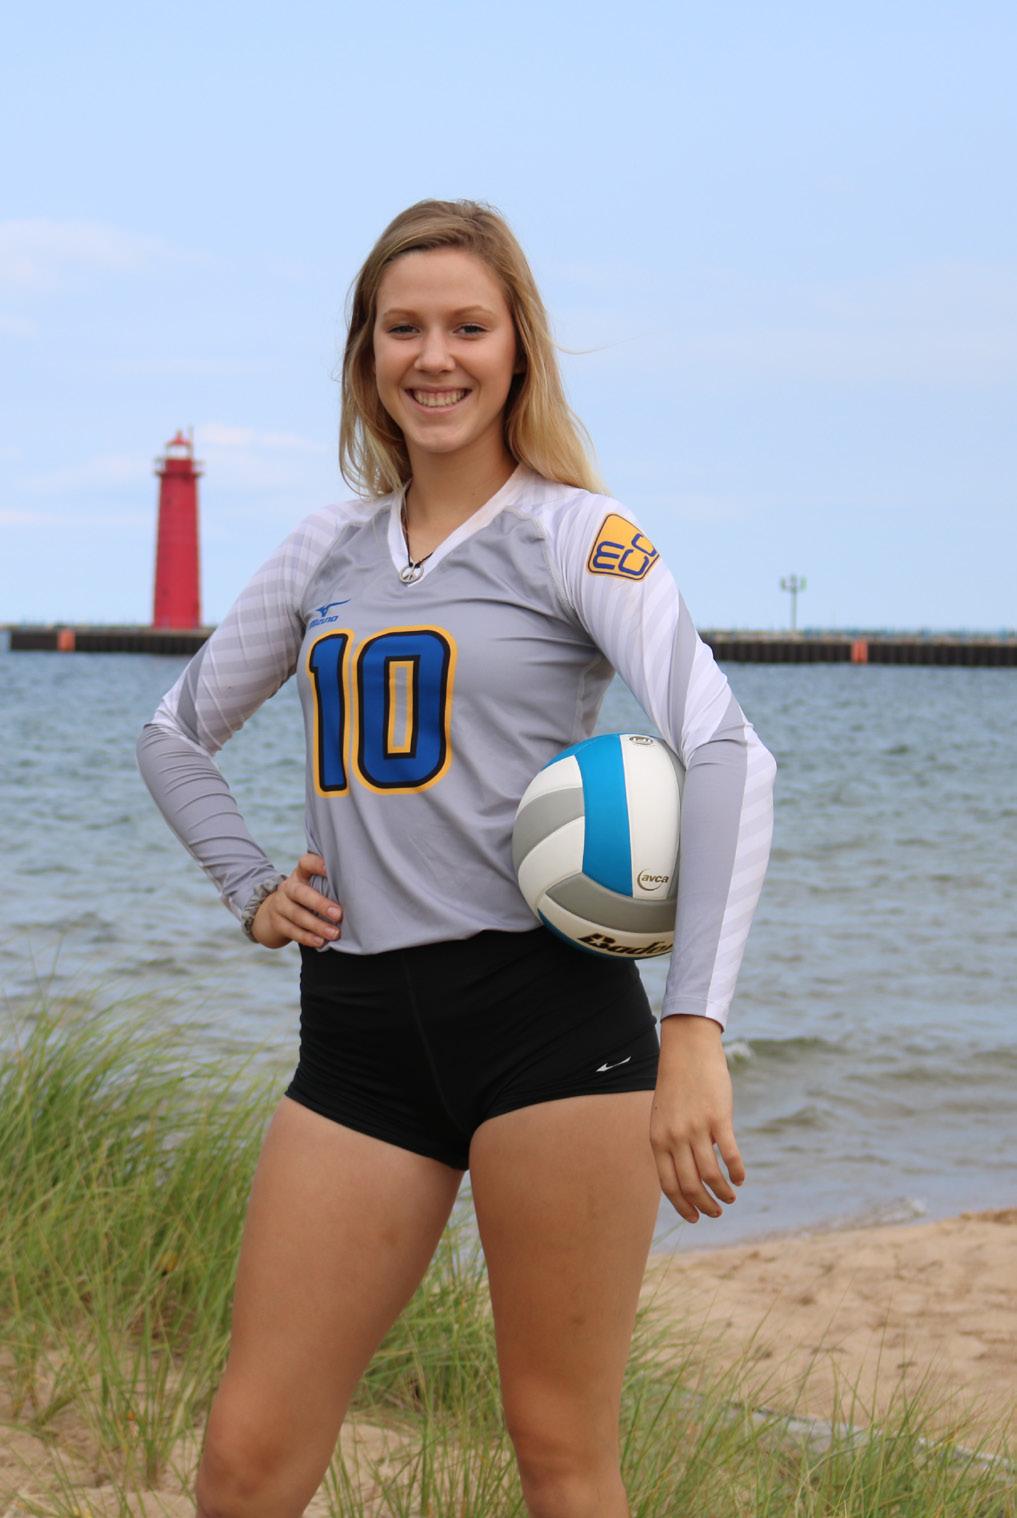 ..The Call Hobbies:...Scuba diving, reading, traveling Name:...Madison Heiss Height:...5 10 Position:... Middle Hitter Parents:...Bryan & Heather Heiss Hometown:...Norton Shores, MI High School:.